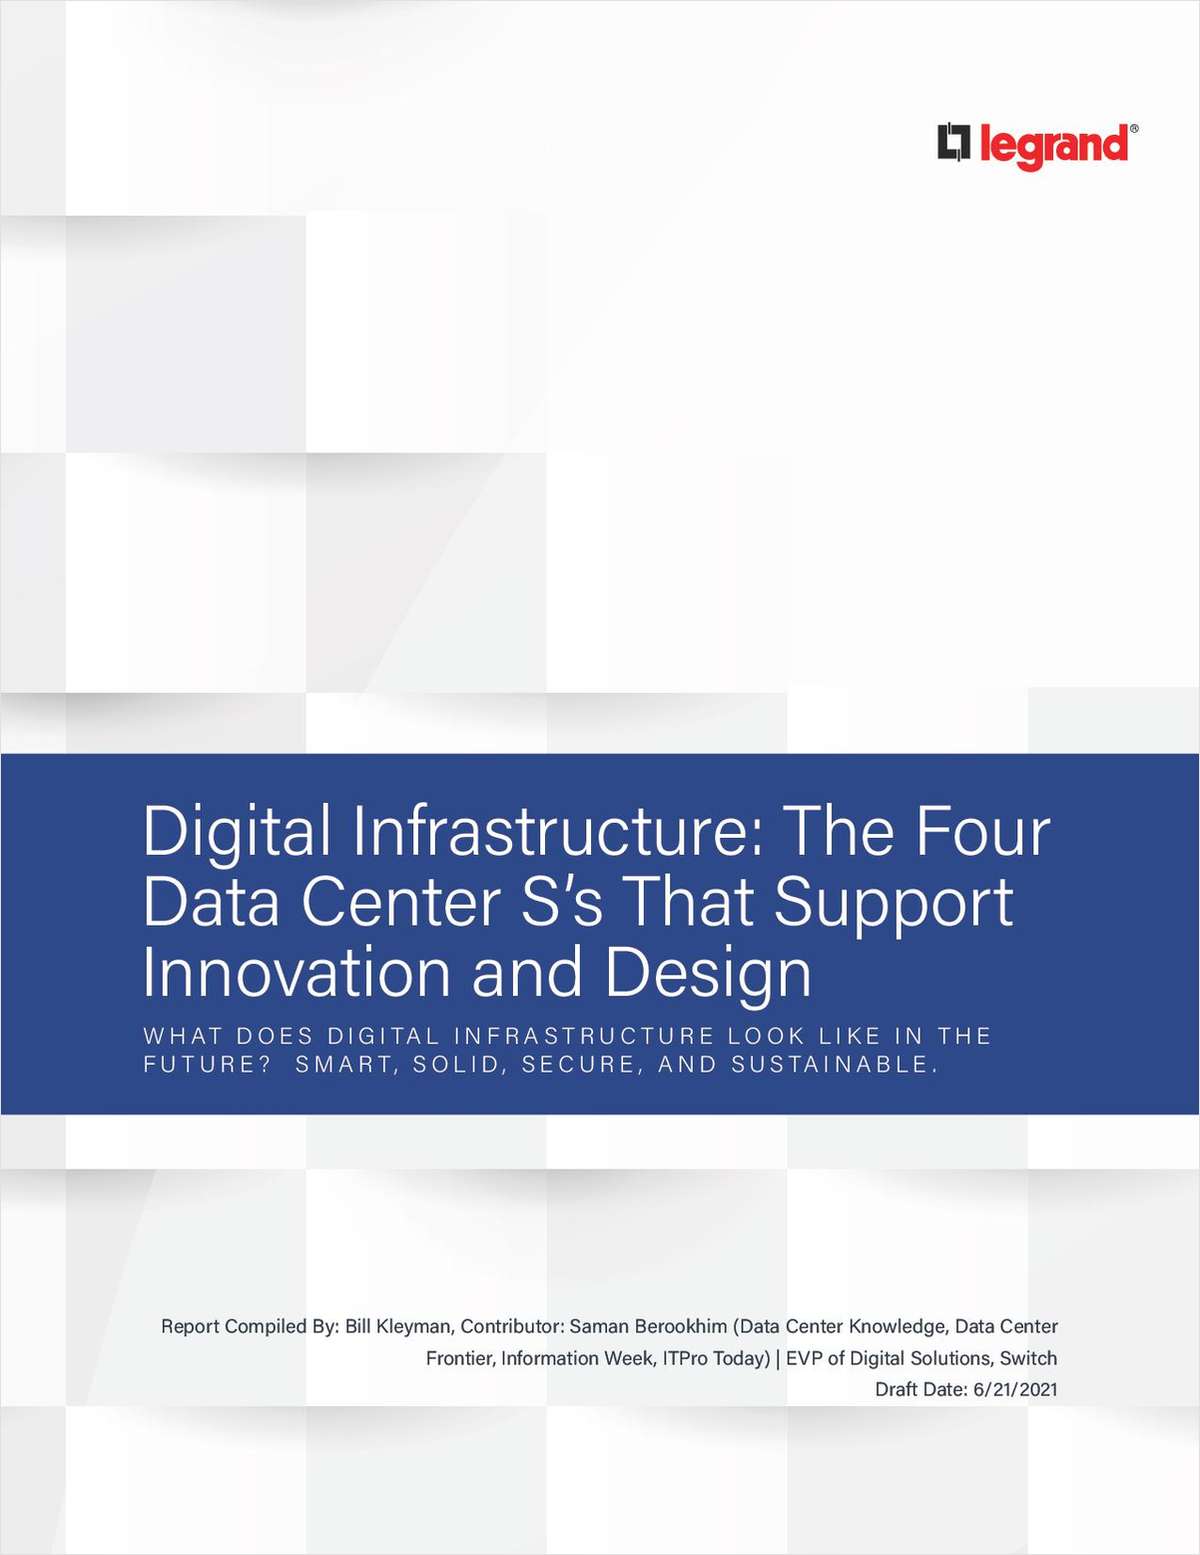 Digital Infrastructure: The Four Data Center S's That Support Innovation and Design